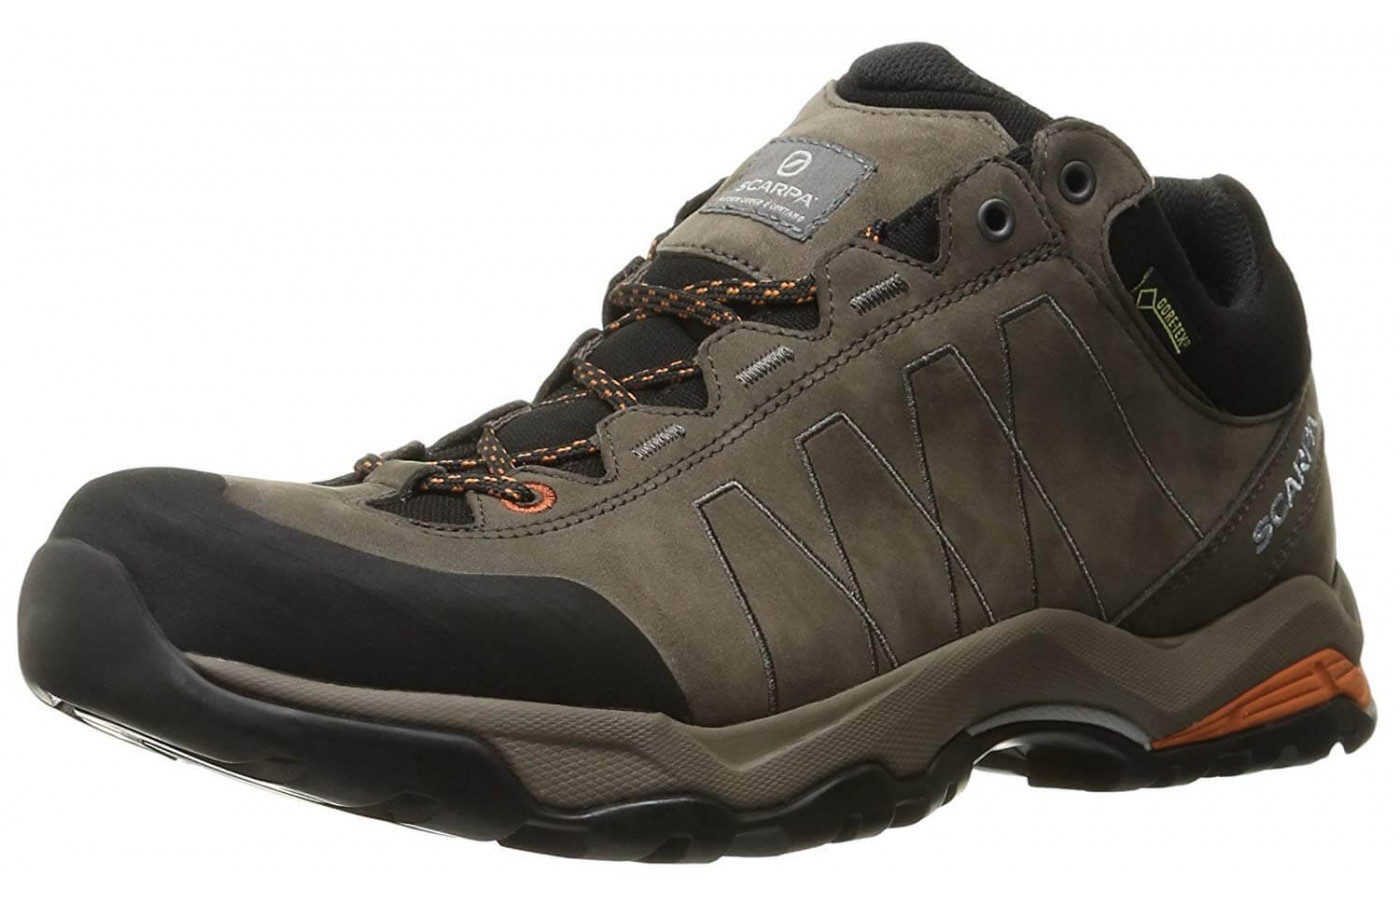 The Moraine Plus GTX is only available in neutral colorways